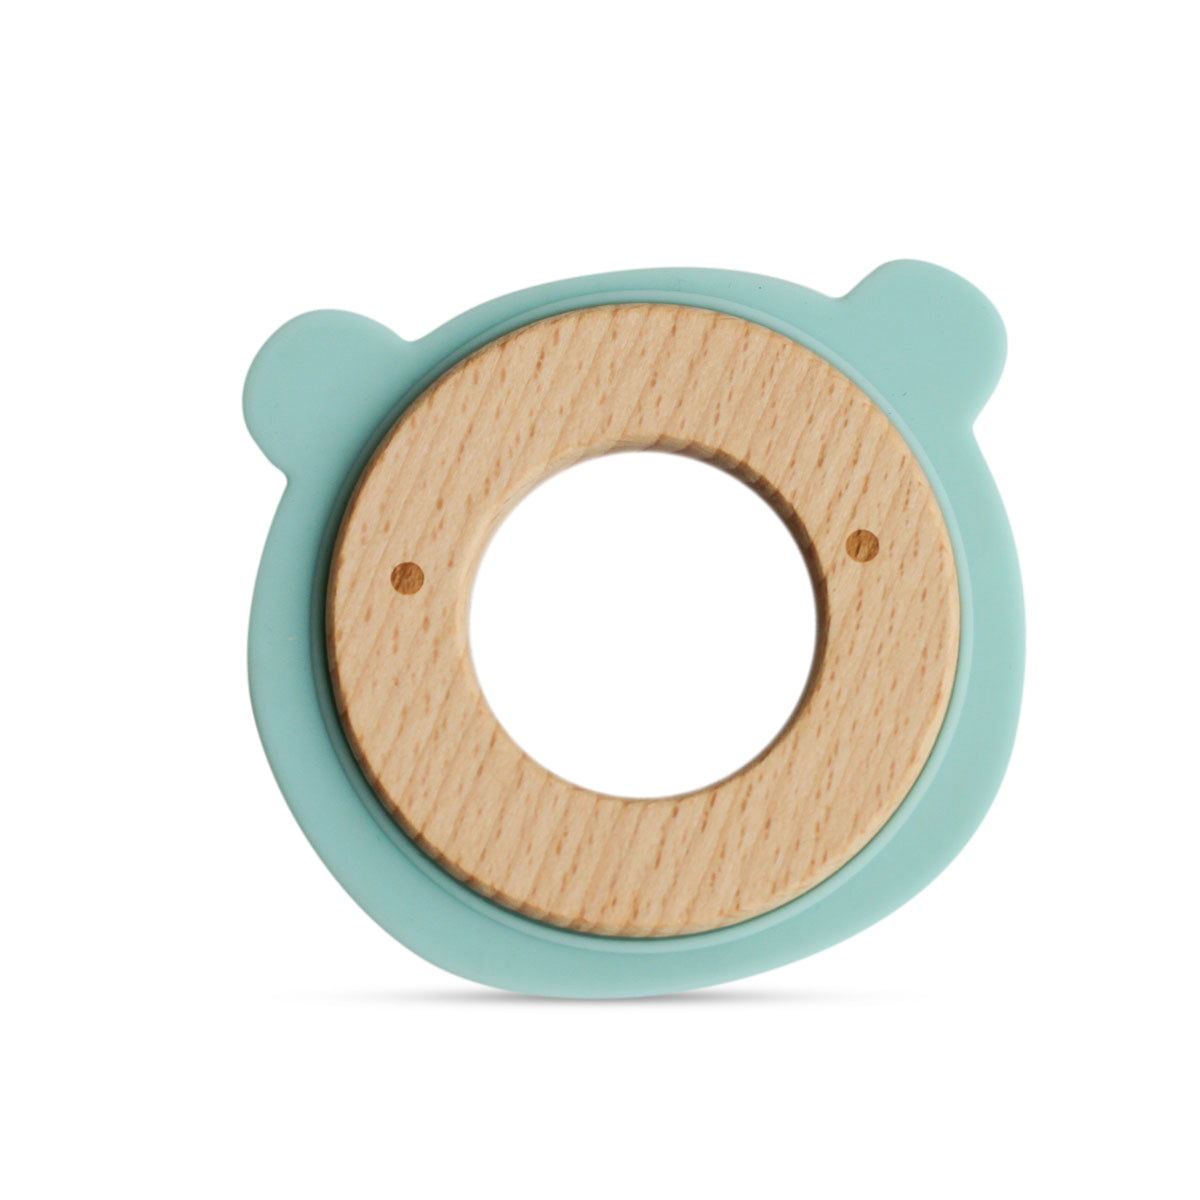 Wood + Silicone Disc Teether Toy - Blue